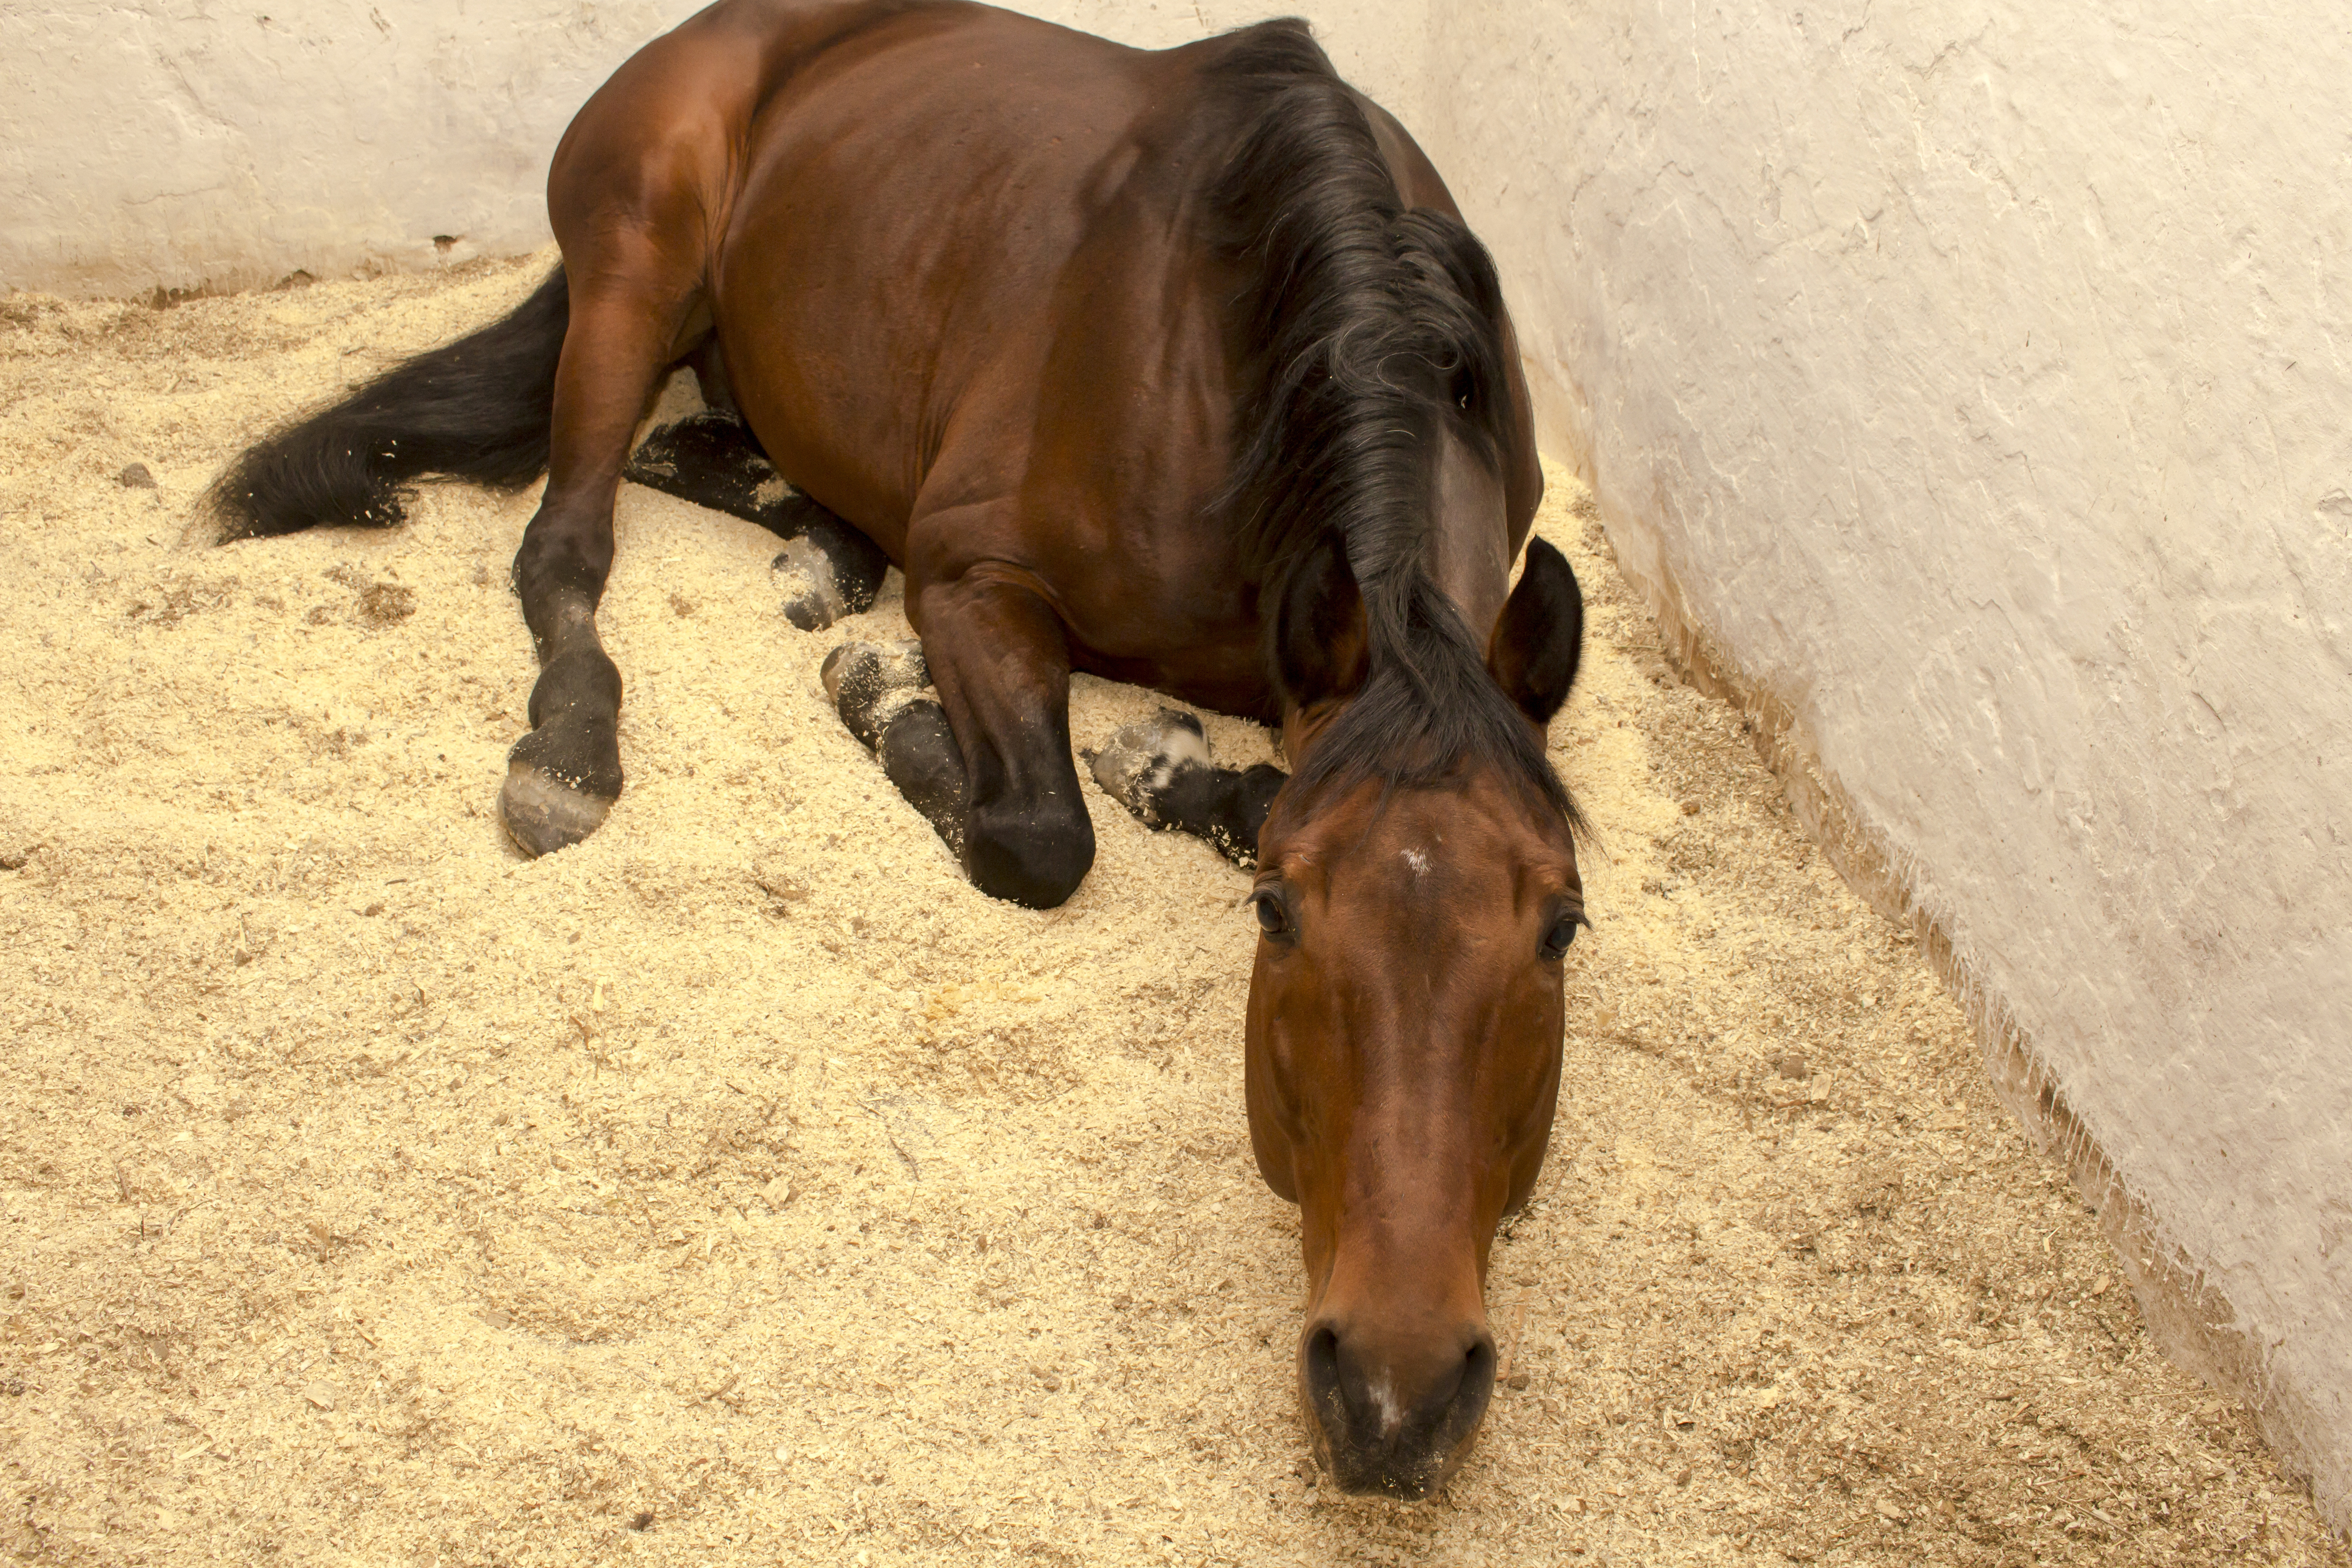 A horse lying in wood shavings bedding